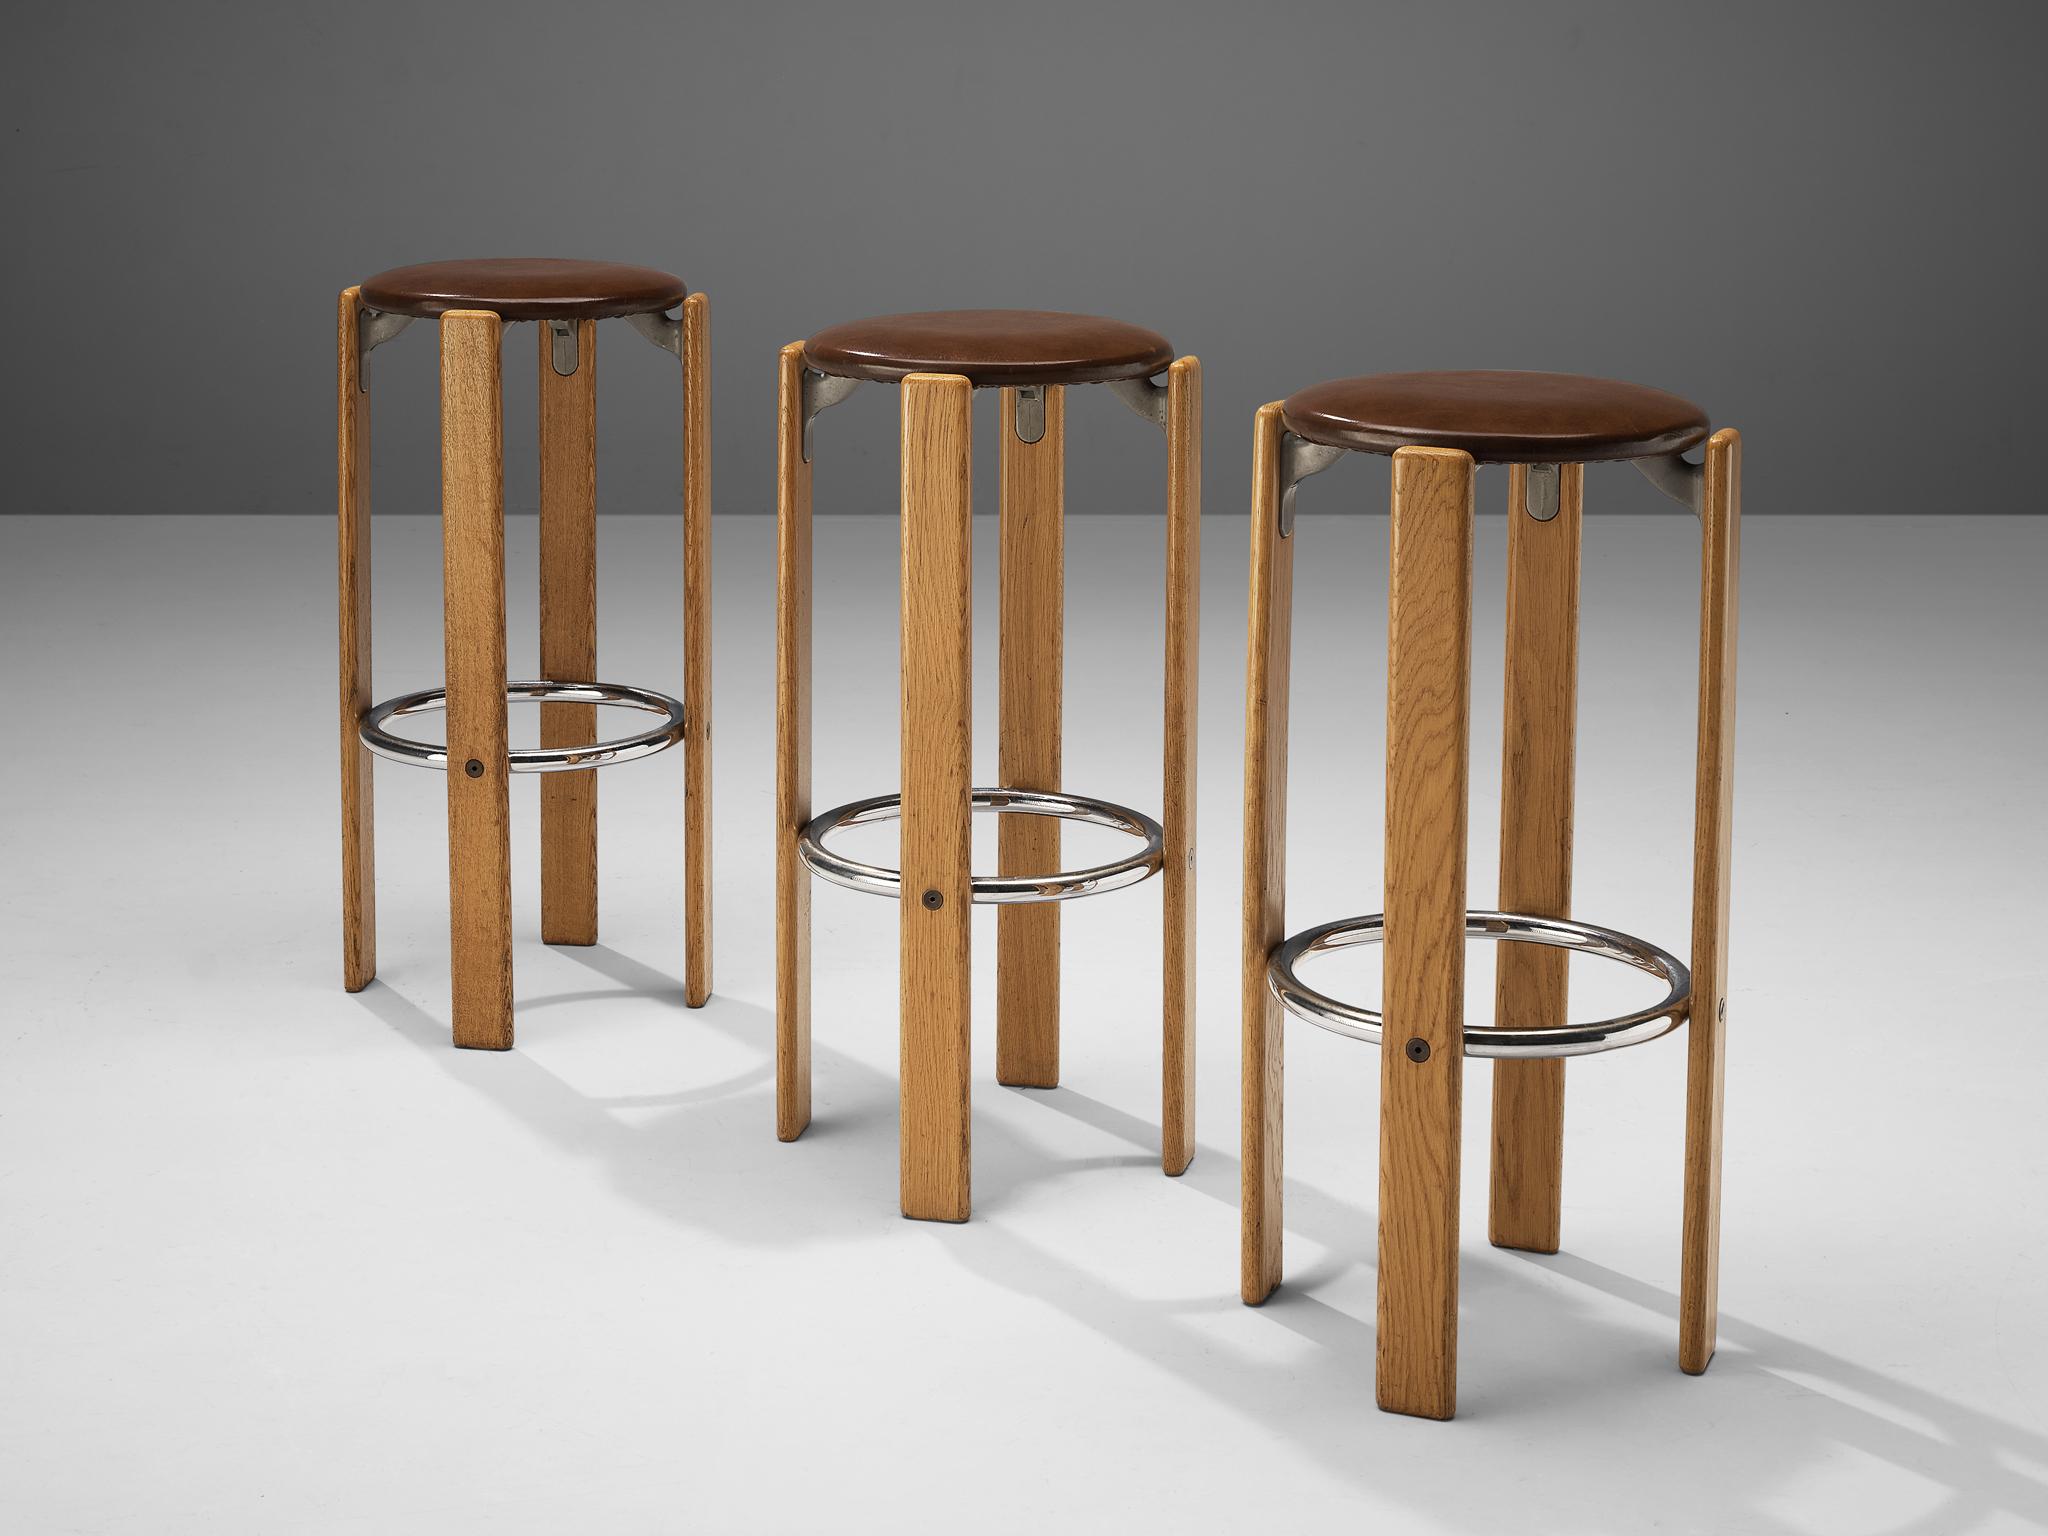 Bruno Rey for dietiker, set of 3 bar stools, birch, leatherette and metal, Switzerland, 1970s.

This set of three functionalist barstools is an iconic design by Bruno Rey. Characteristic steel brackets support the leatherette upholstered round seat.